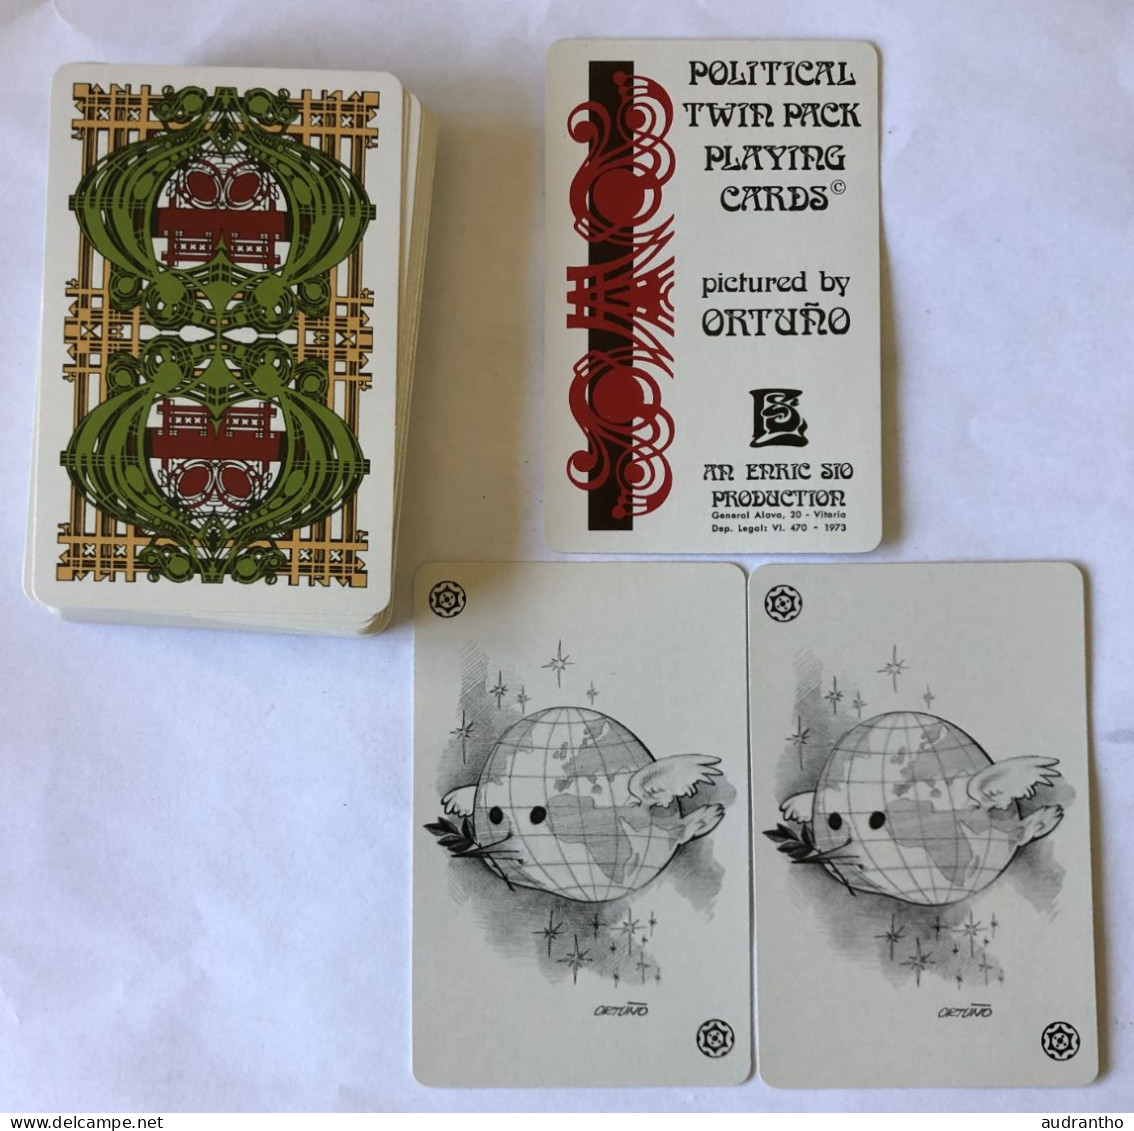 Très Beau Double Jeu 54 Cartes 1973 - Caricature Personnalité - Political Twin Pack Playing Cards By ORTUNO - Erric Sio - 54 Cards